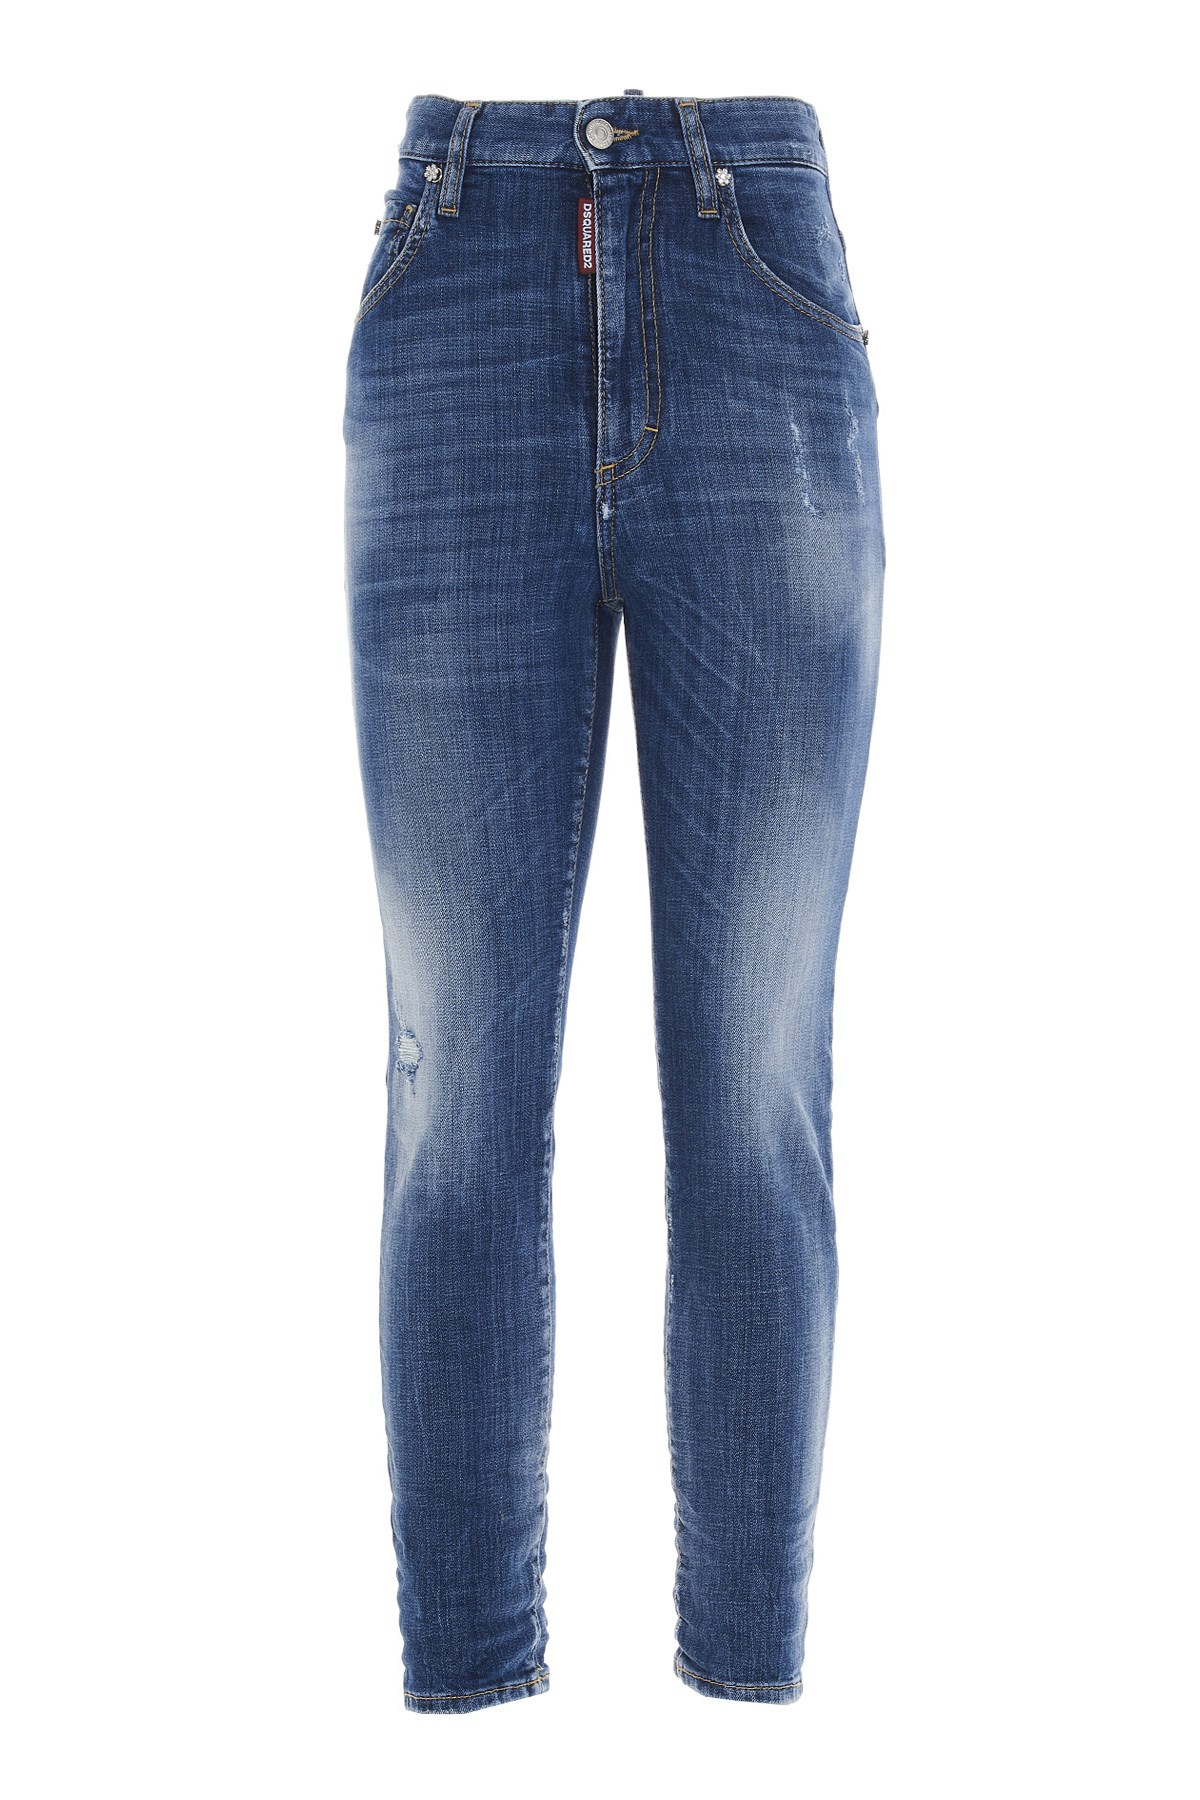 DSQUARED2 'Twiggy' Jeans